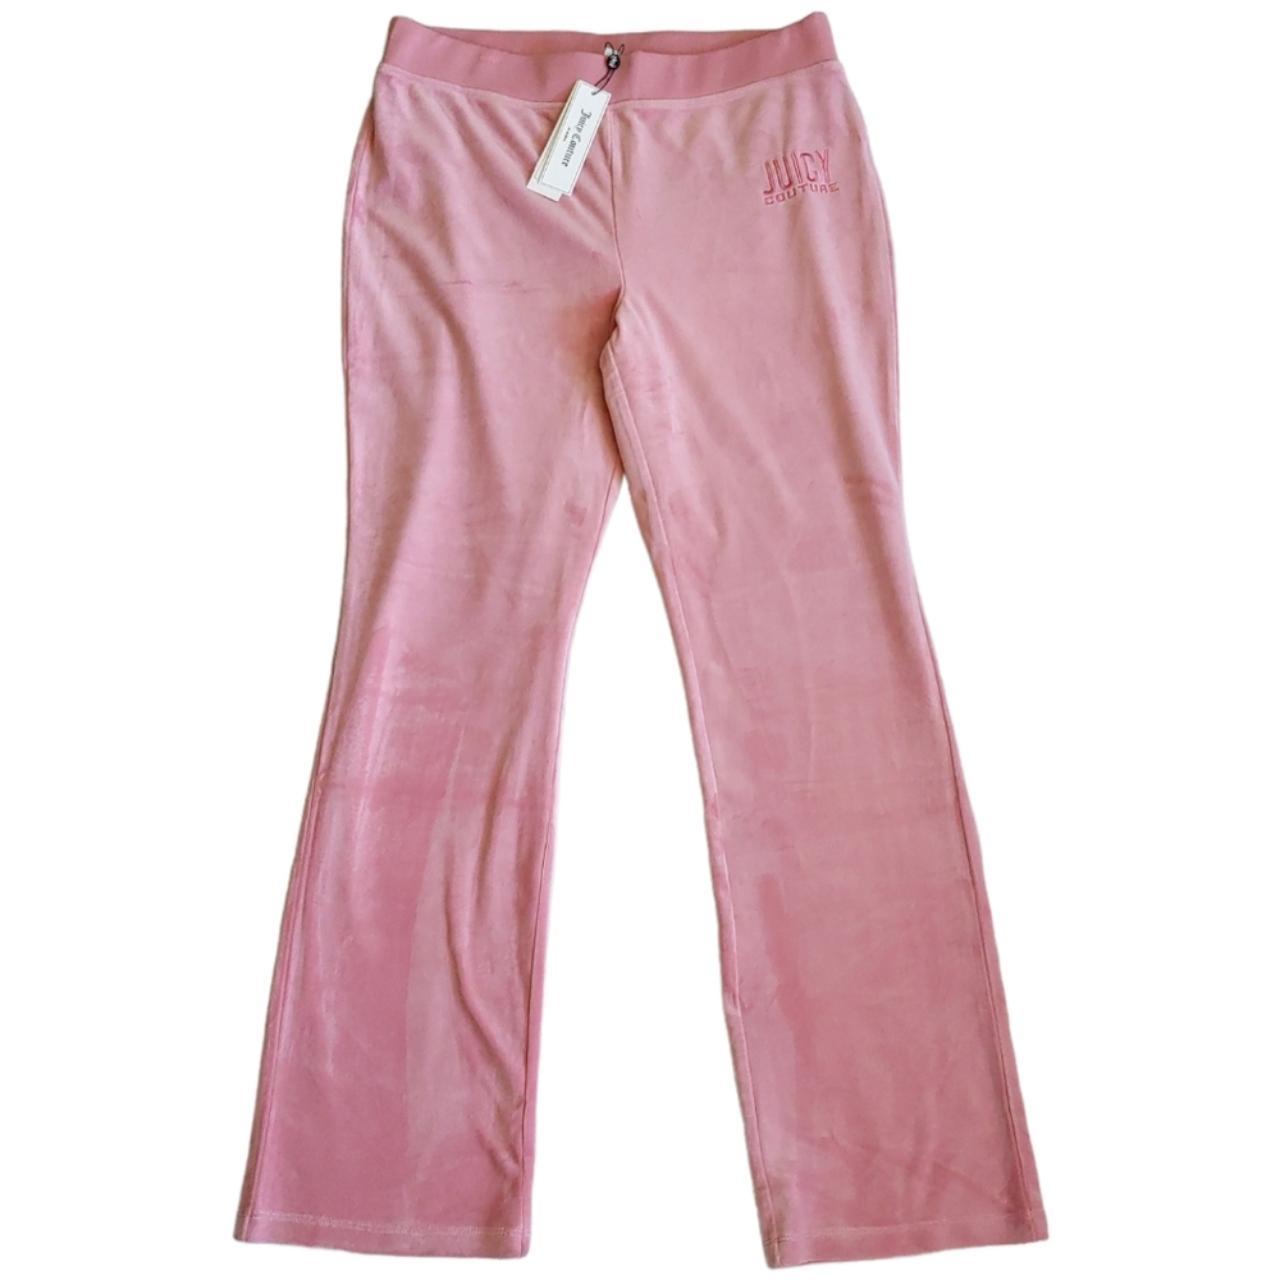 Product Image 1 - New Juicy Couture Pink Embroidered